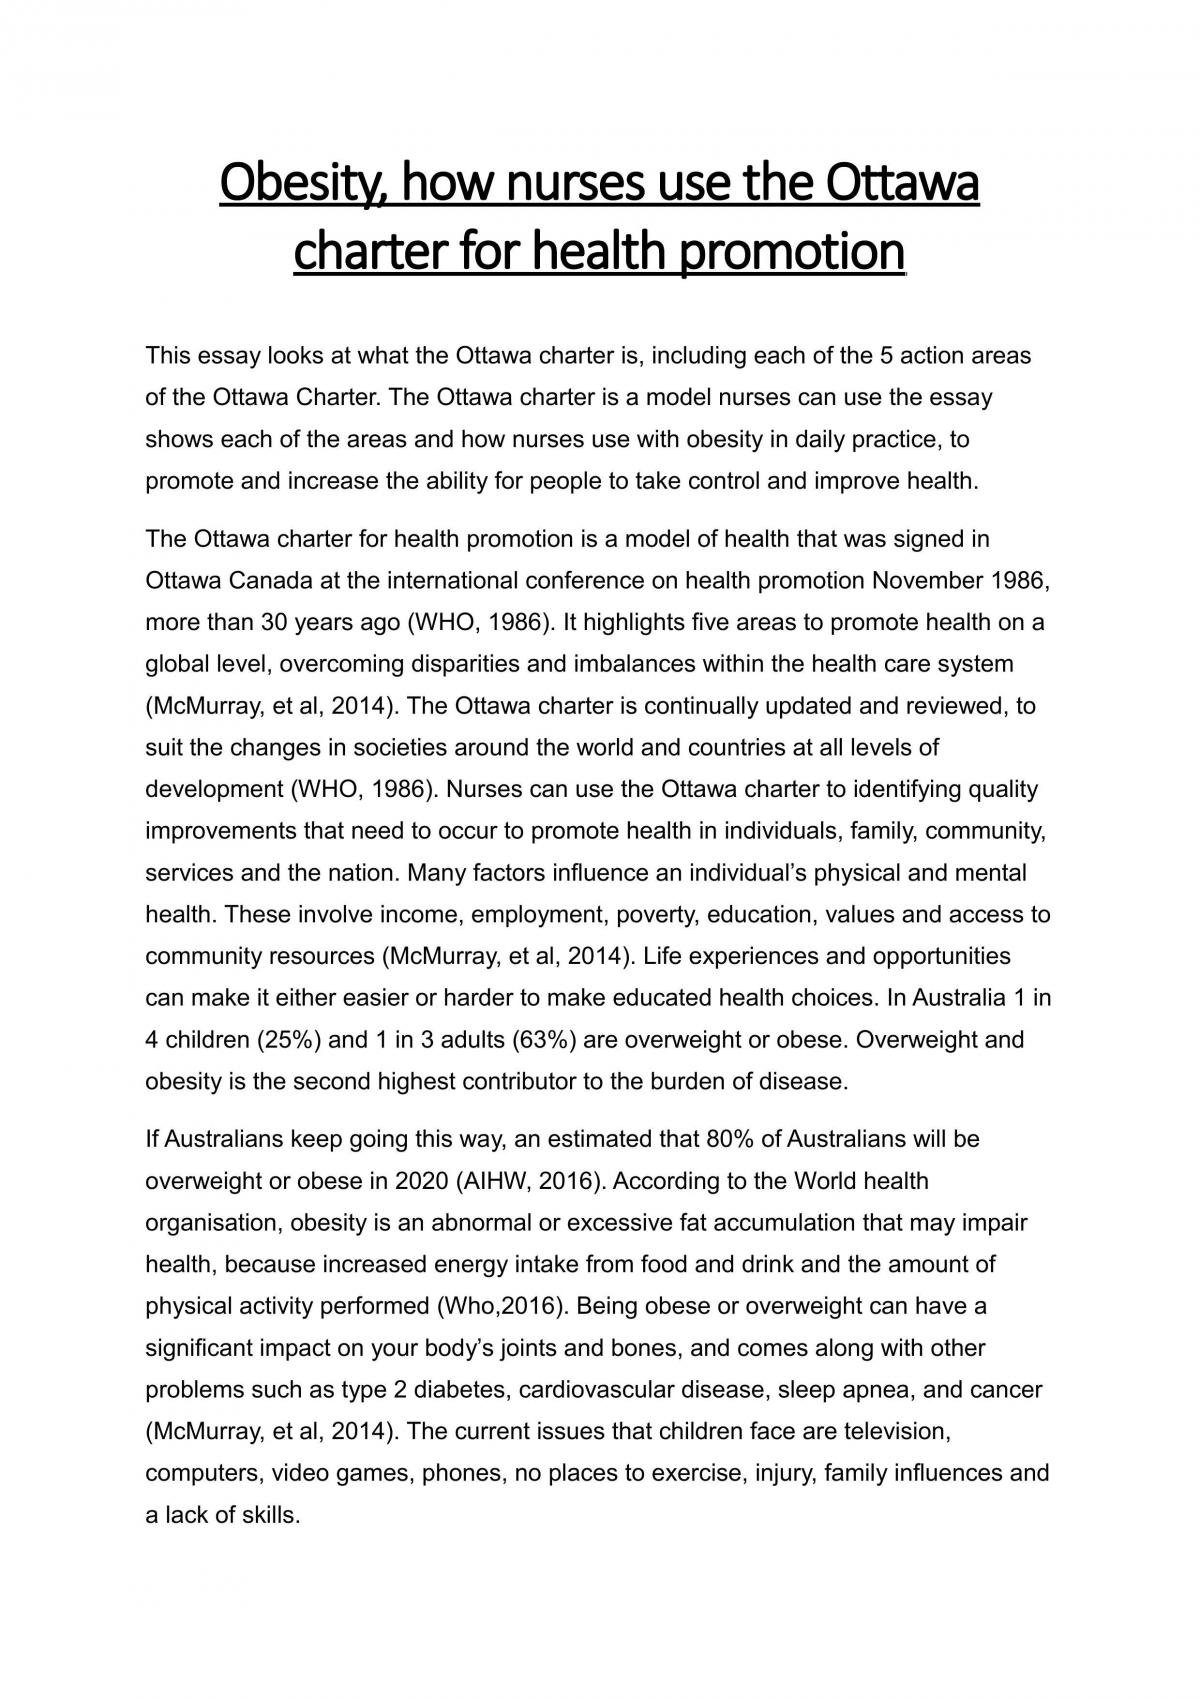 Using a Health Topic and the Ottawa Character - Page 1